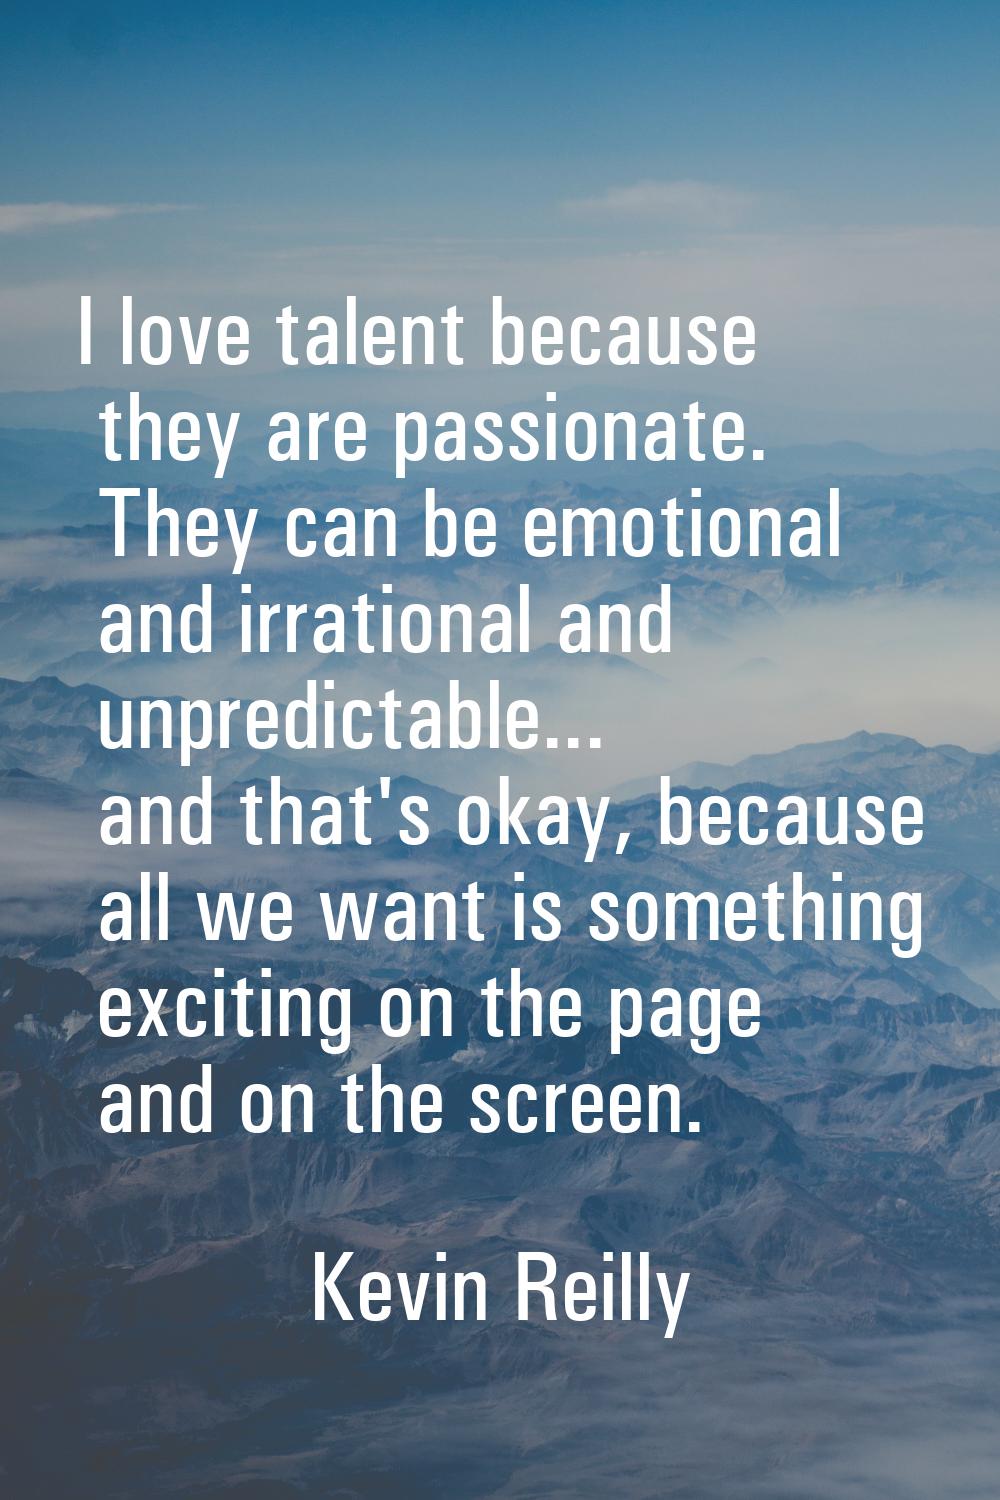 I love talent because they are passionate. They can be emotional and irrational and unpredictable..